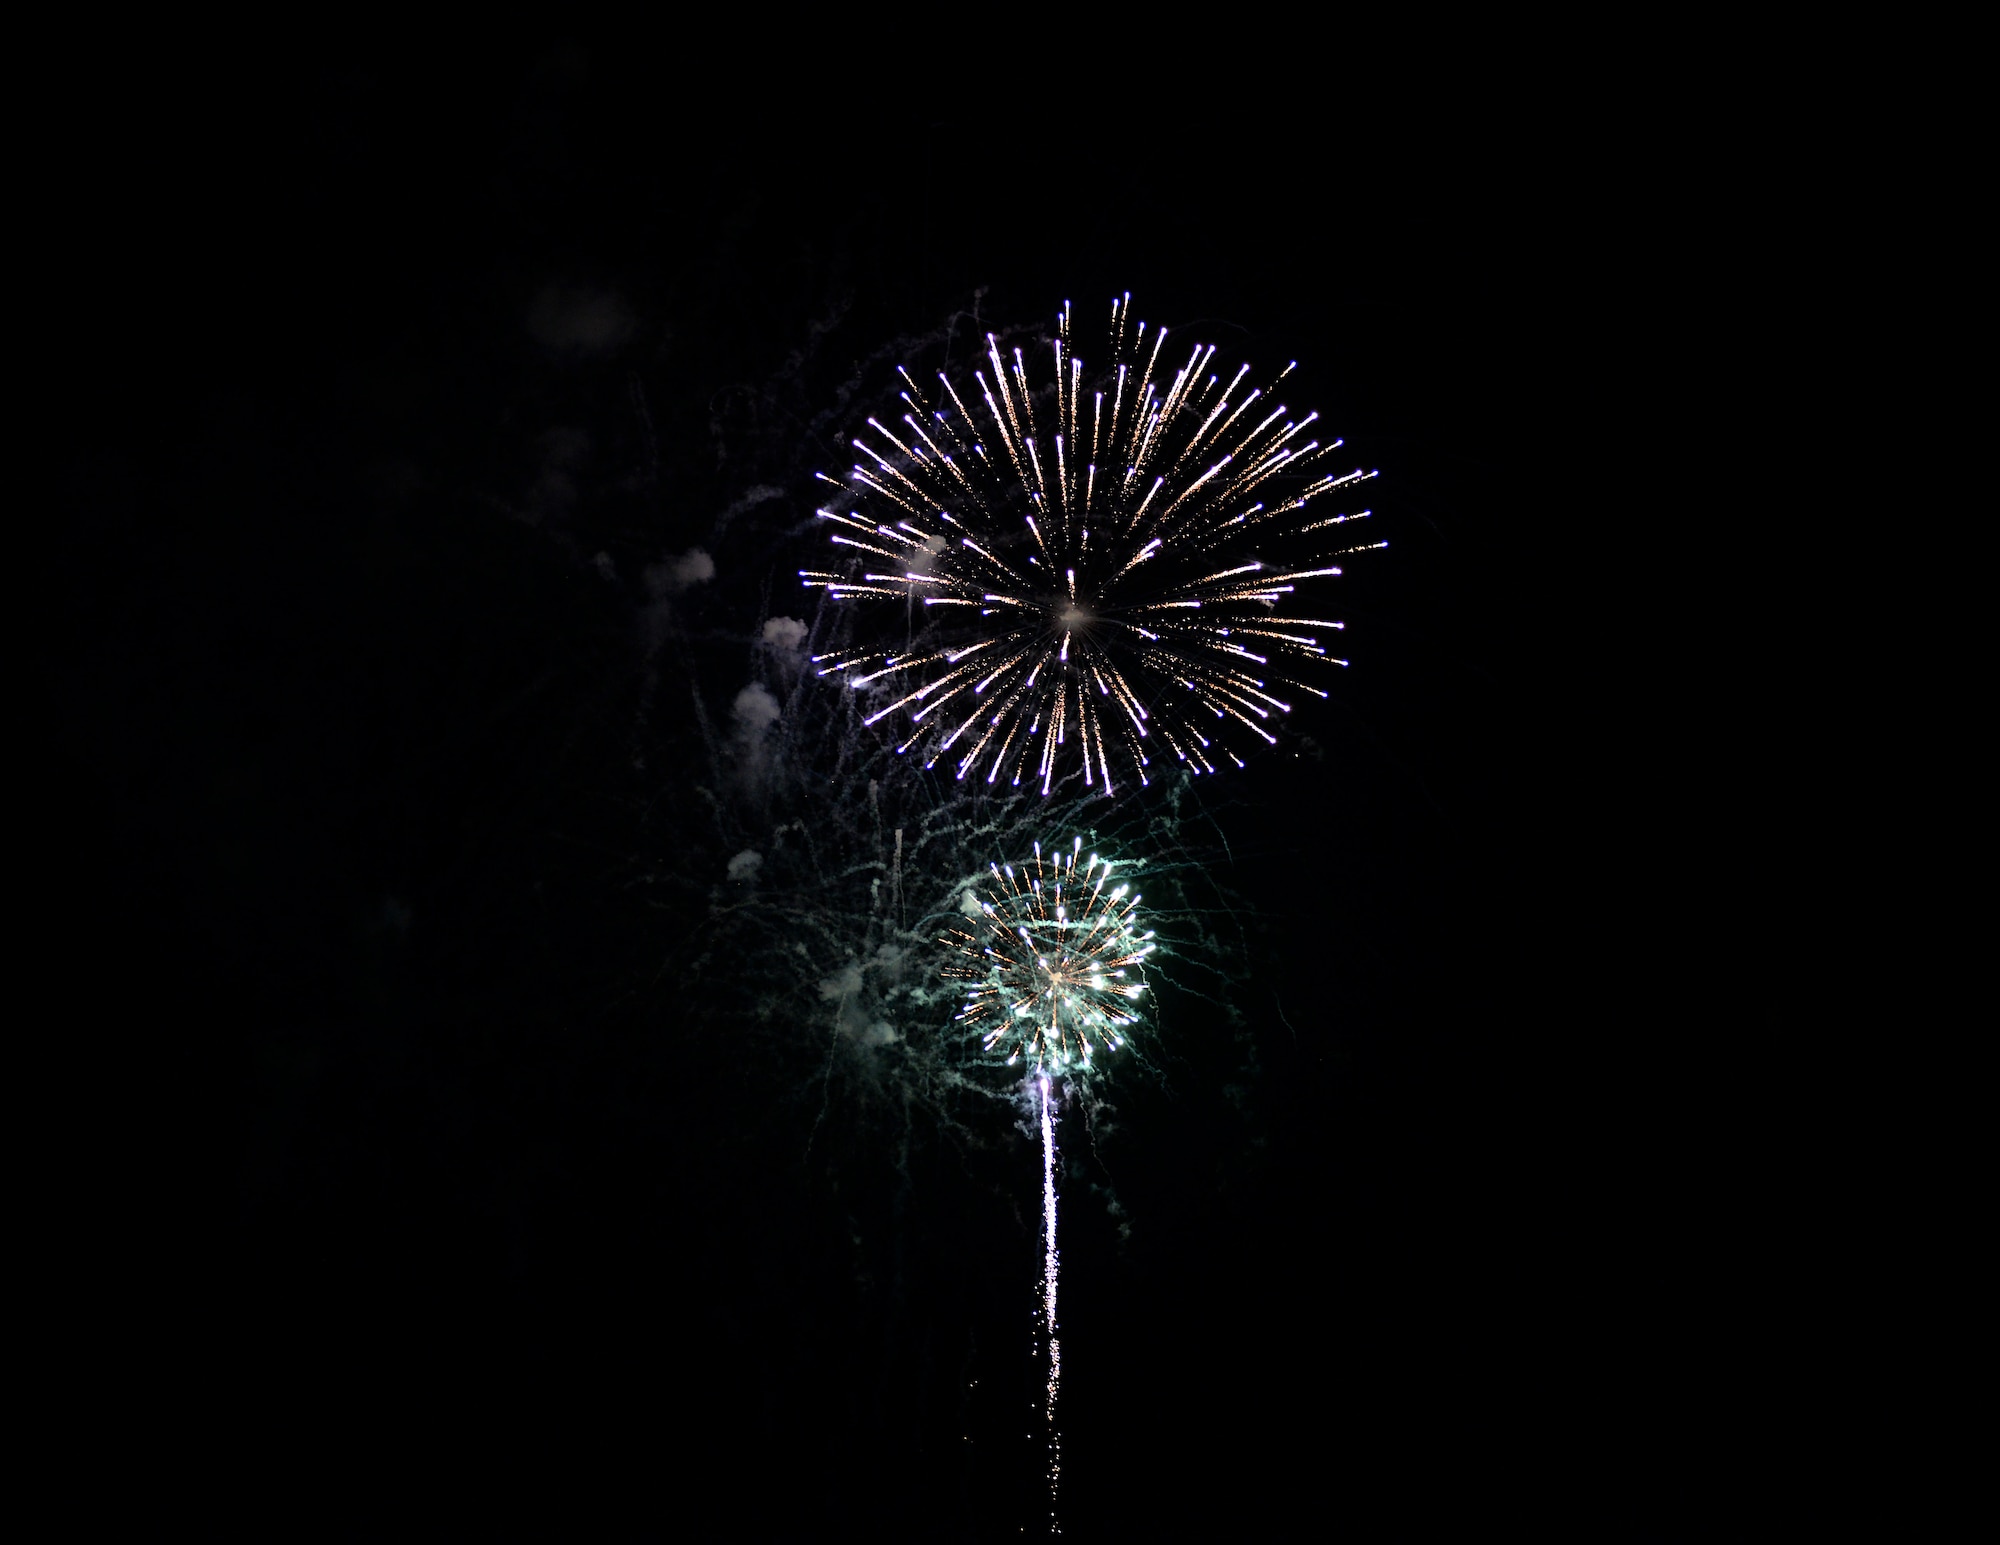 Fireworks light up the night sky over Columbus Air Force Base, Miss. during the BLAZE Fest Fireworks show, July 3, 2020. The 20-minute fireworks show was livestreamed on Facebook live to allow as much participation in the Independence Day holiday while practicing safe social distancing procedures. (U.S. Air Force photo by Airman 1st Class Hannah Bean)